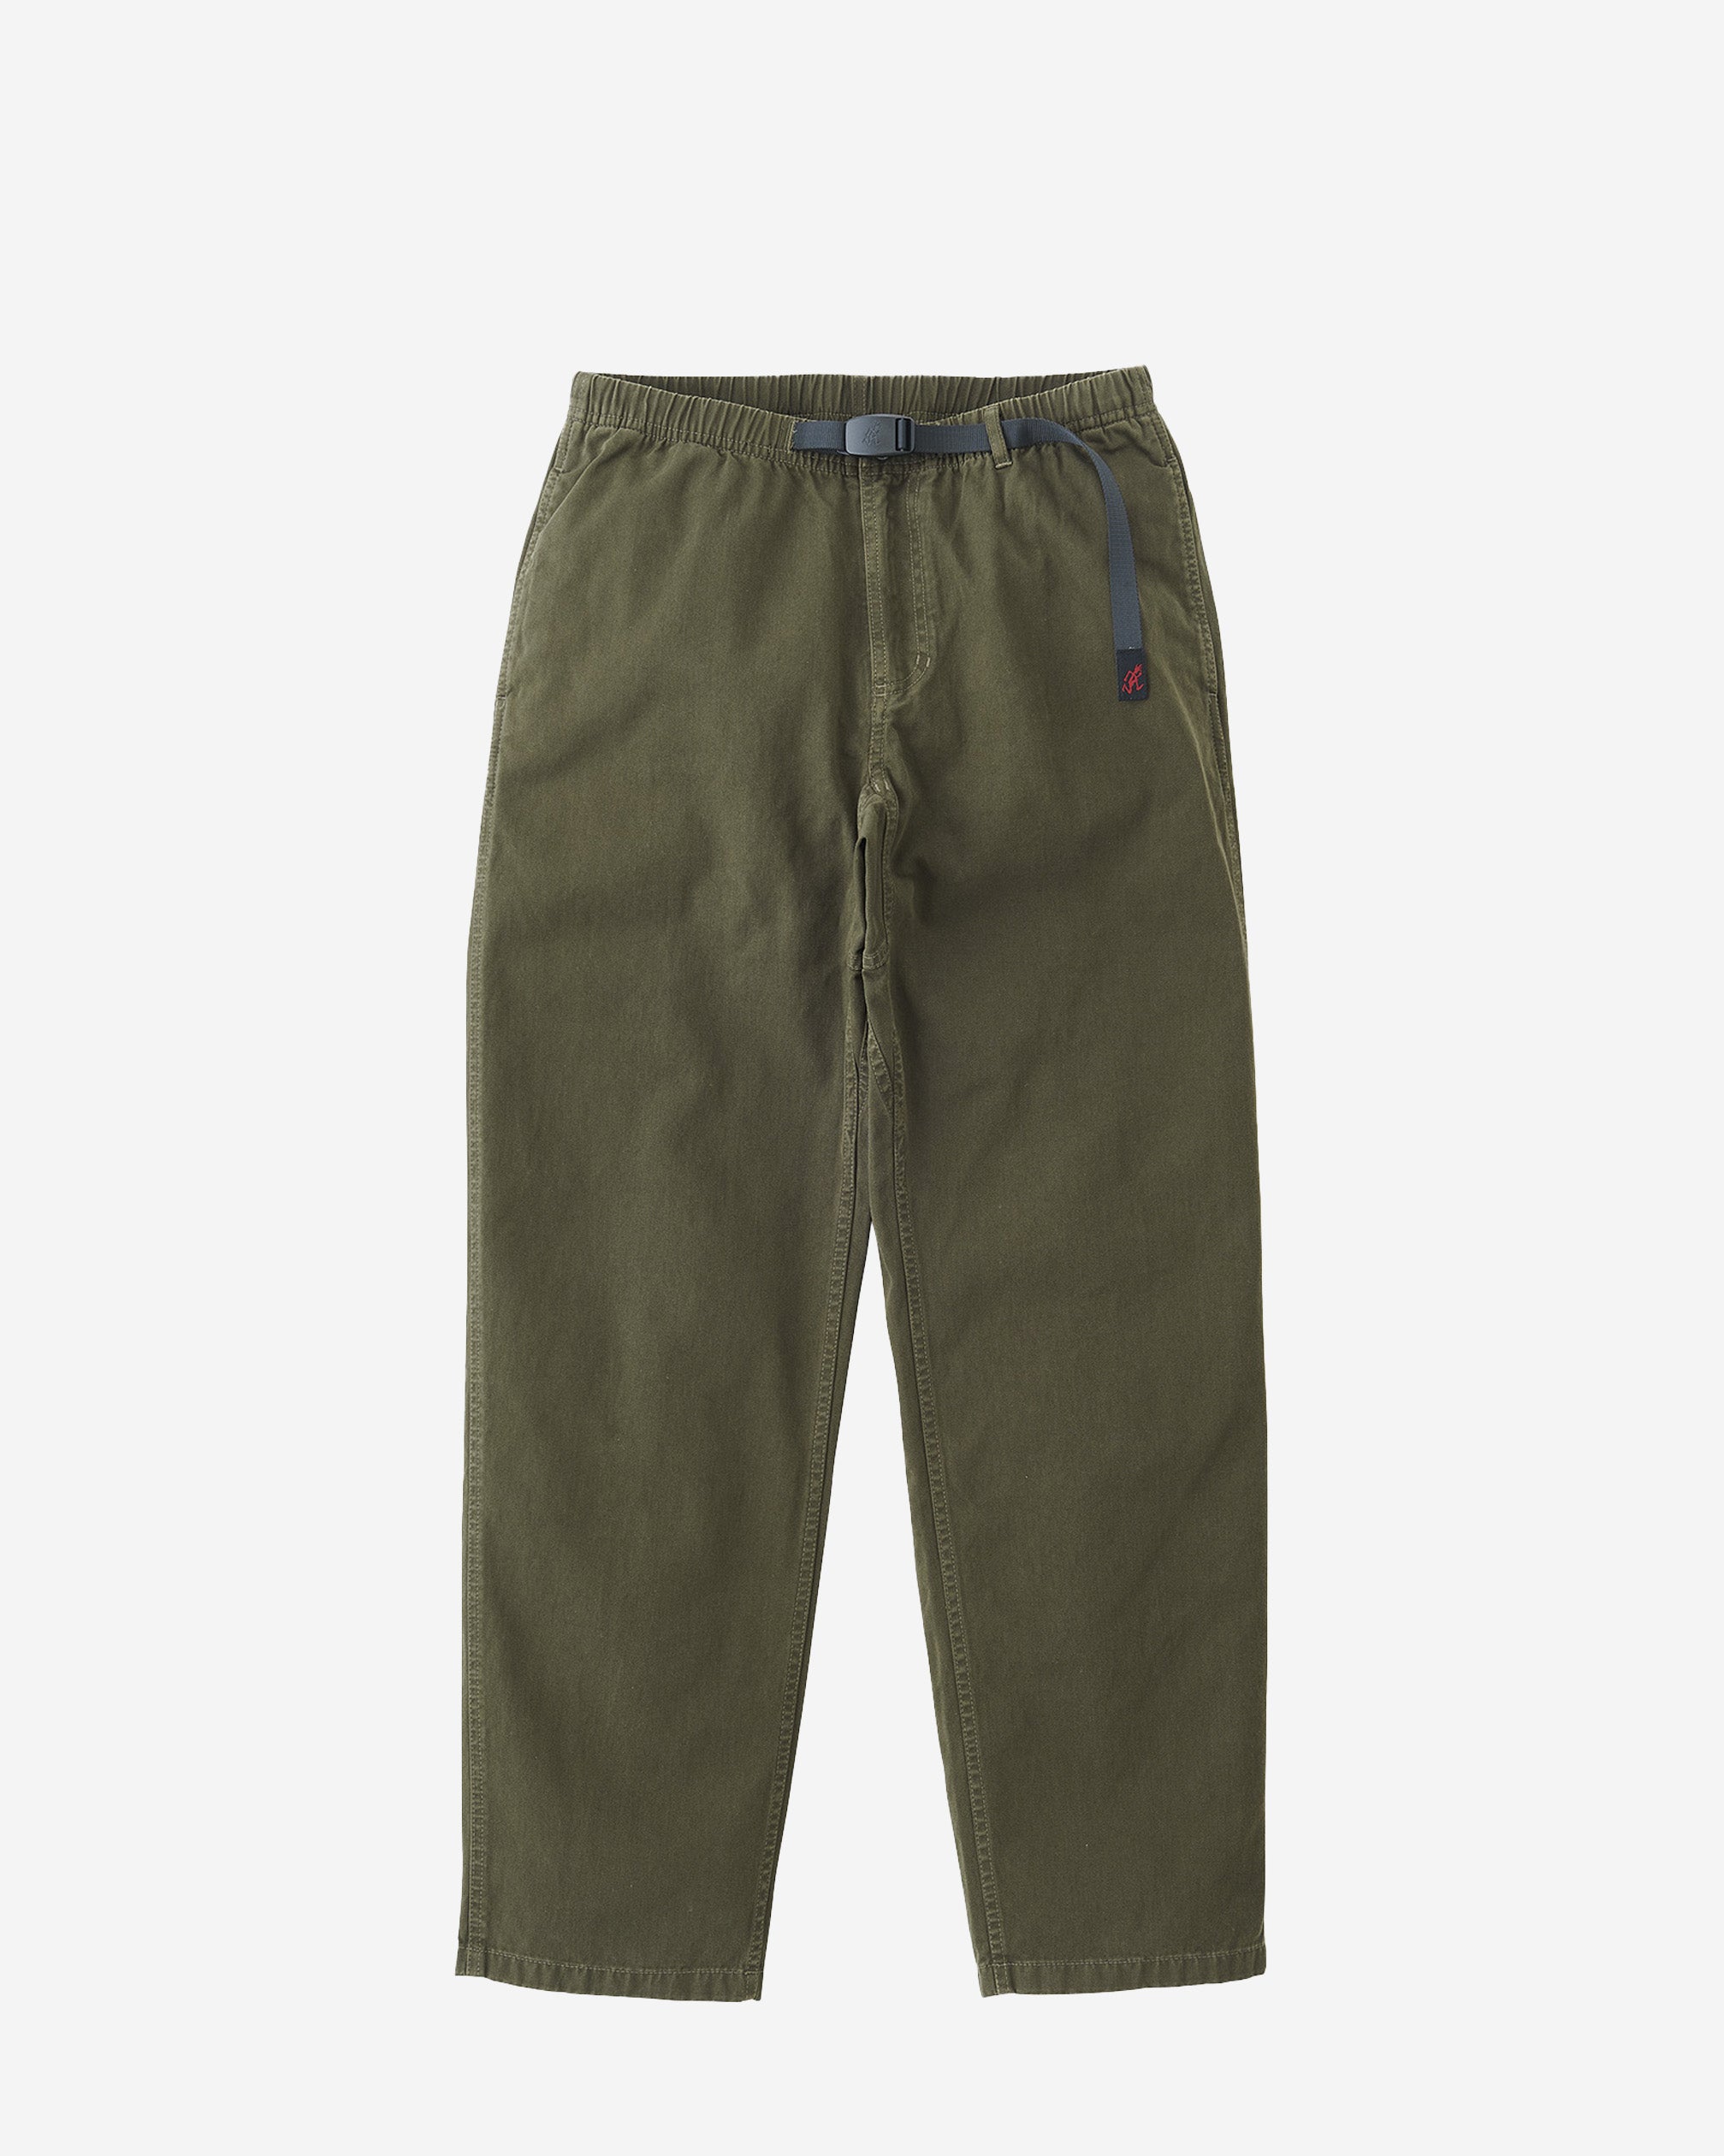 The Original 1982 Gramicci Pants Features gusseted crotch for freedom-of-movement Easy-adjust waistband with integrated belt and buckle Zip fly with two side seam pockets and two back welt pockets Relaxed fit and low rise Inseam 32" Made with 100% Organic Cotton Twill